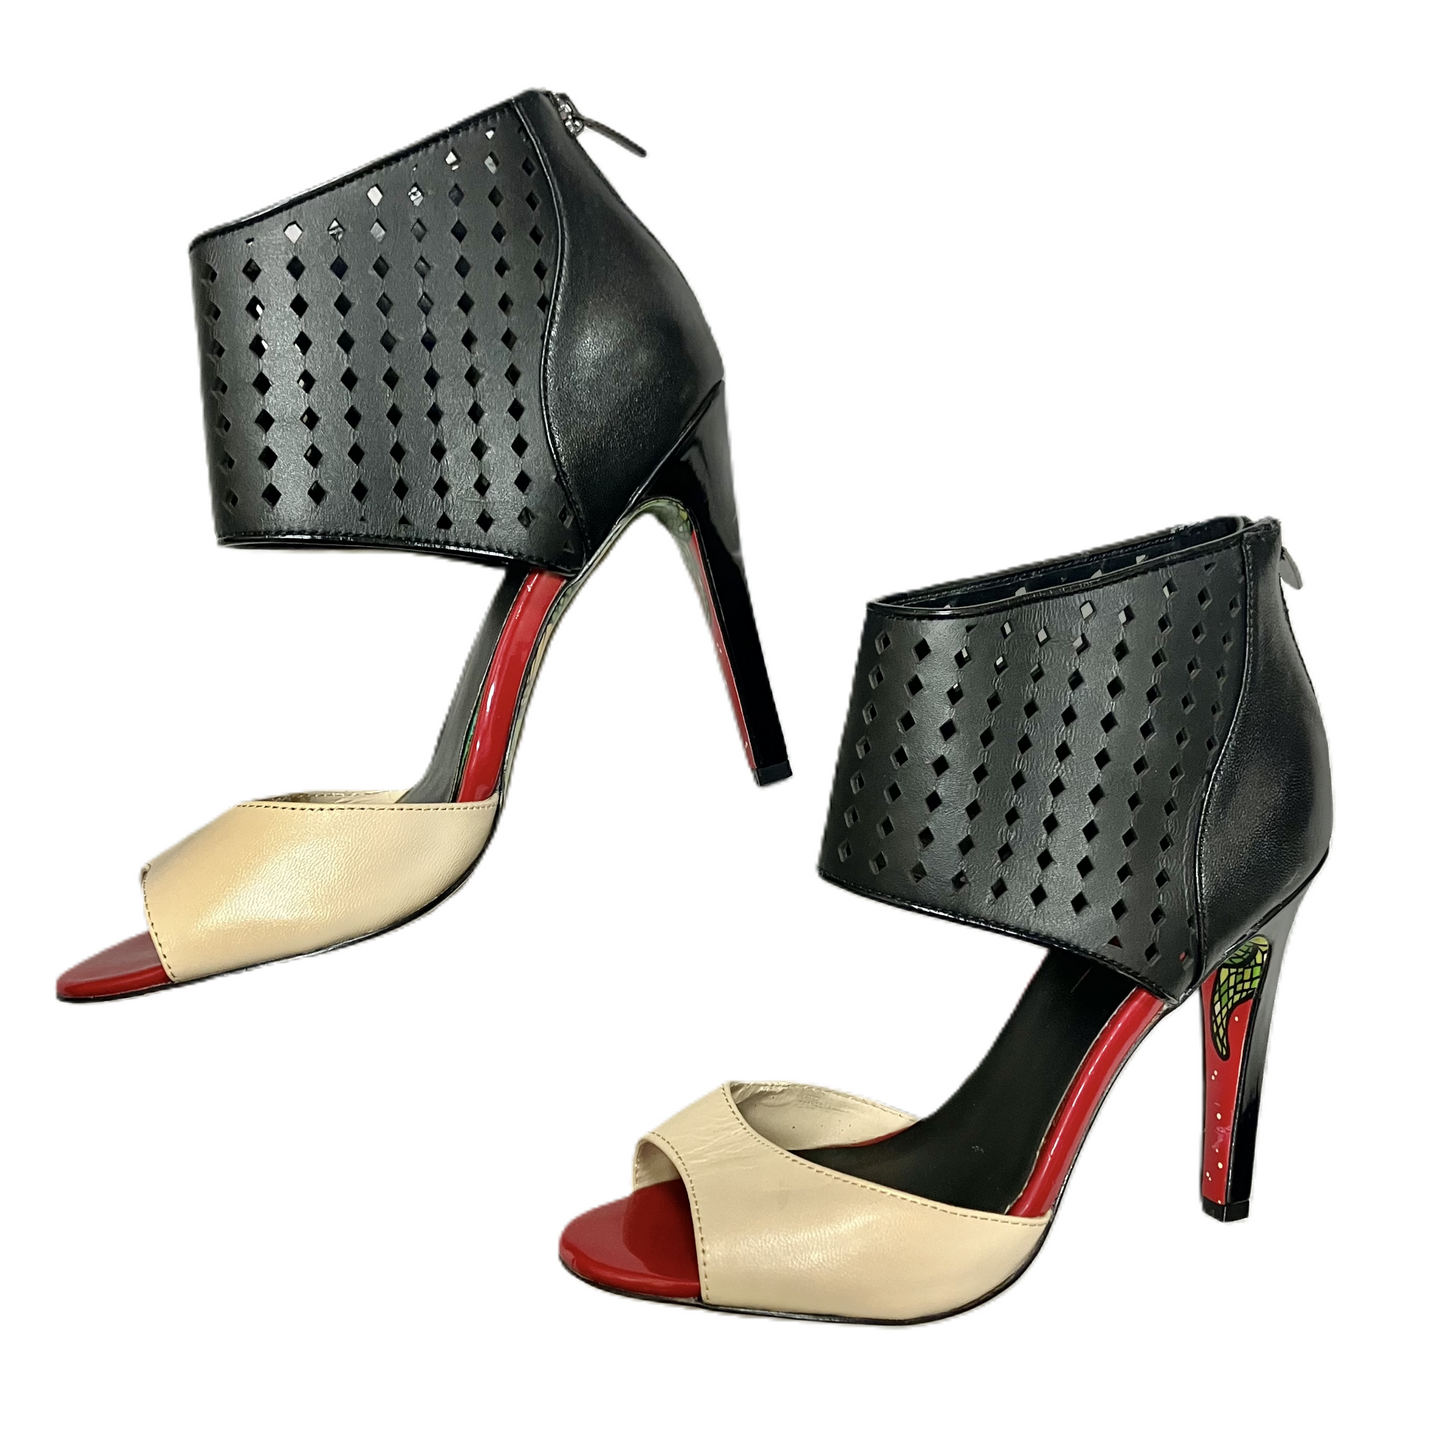 Shoes Heels Stiletto By Taylor Says  Size: 9